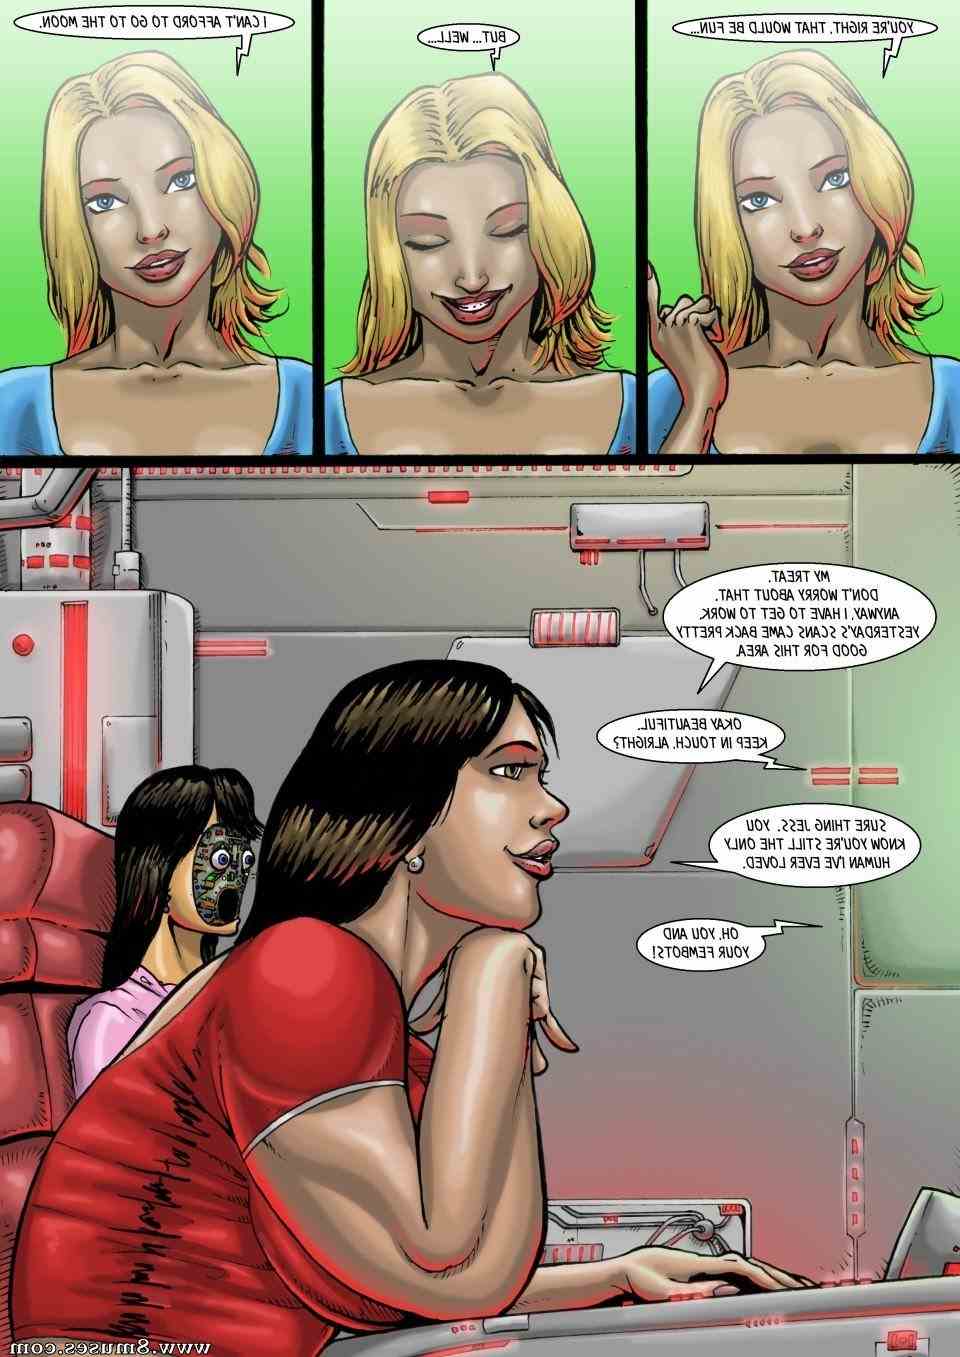 Various-Authors/Predator/Sex-Droids-in-Space Sex_Droids_in_Space__8muses_-_Sex_and_Porn_Comics_6.jpg